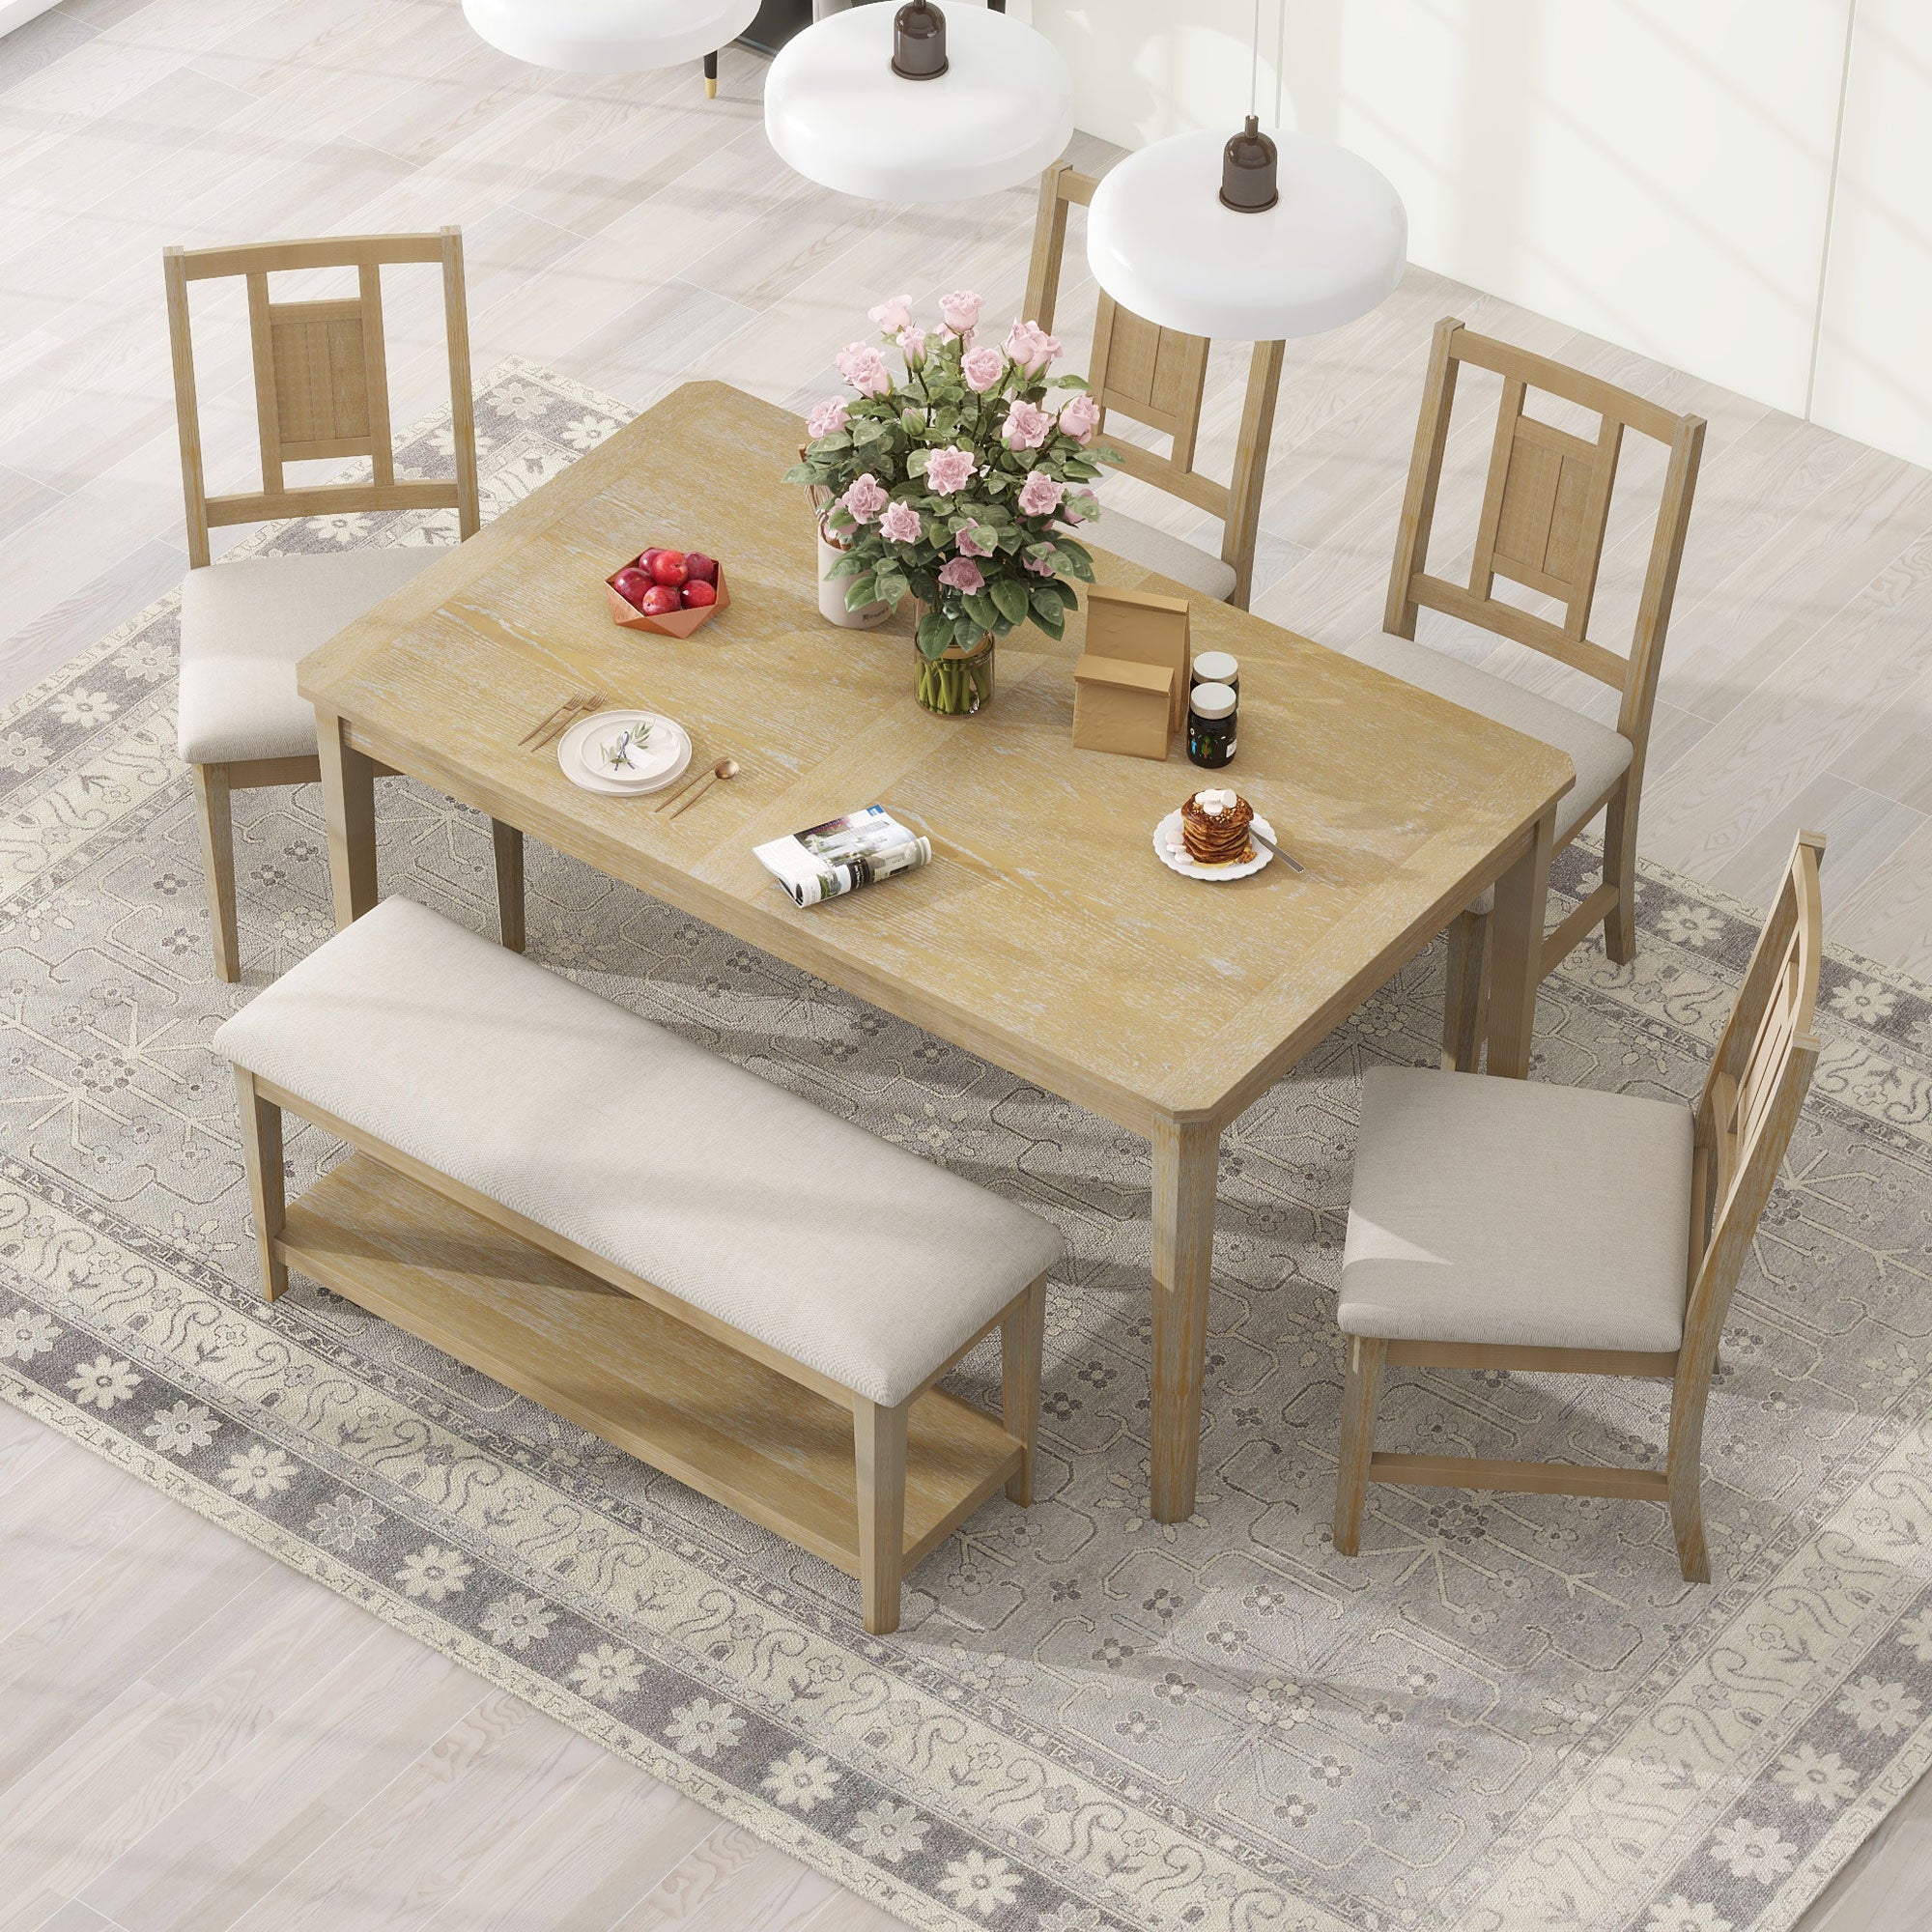 Bellemave 6-Piece Retro Dining Set, Dining Table and 4 Upholstered Chairs & 1 Bench with A Shelf Bellemave